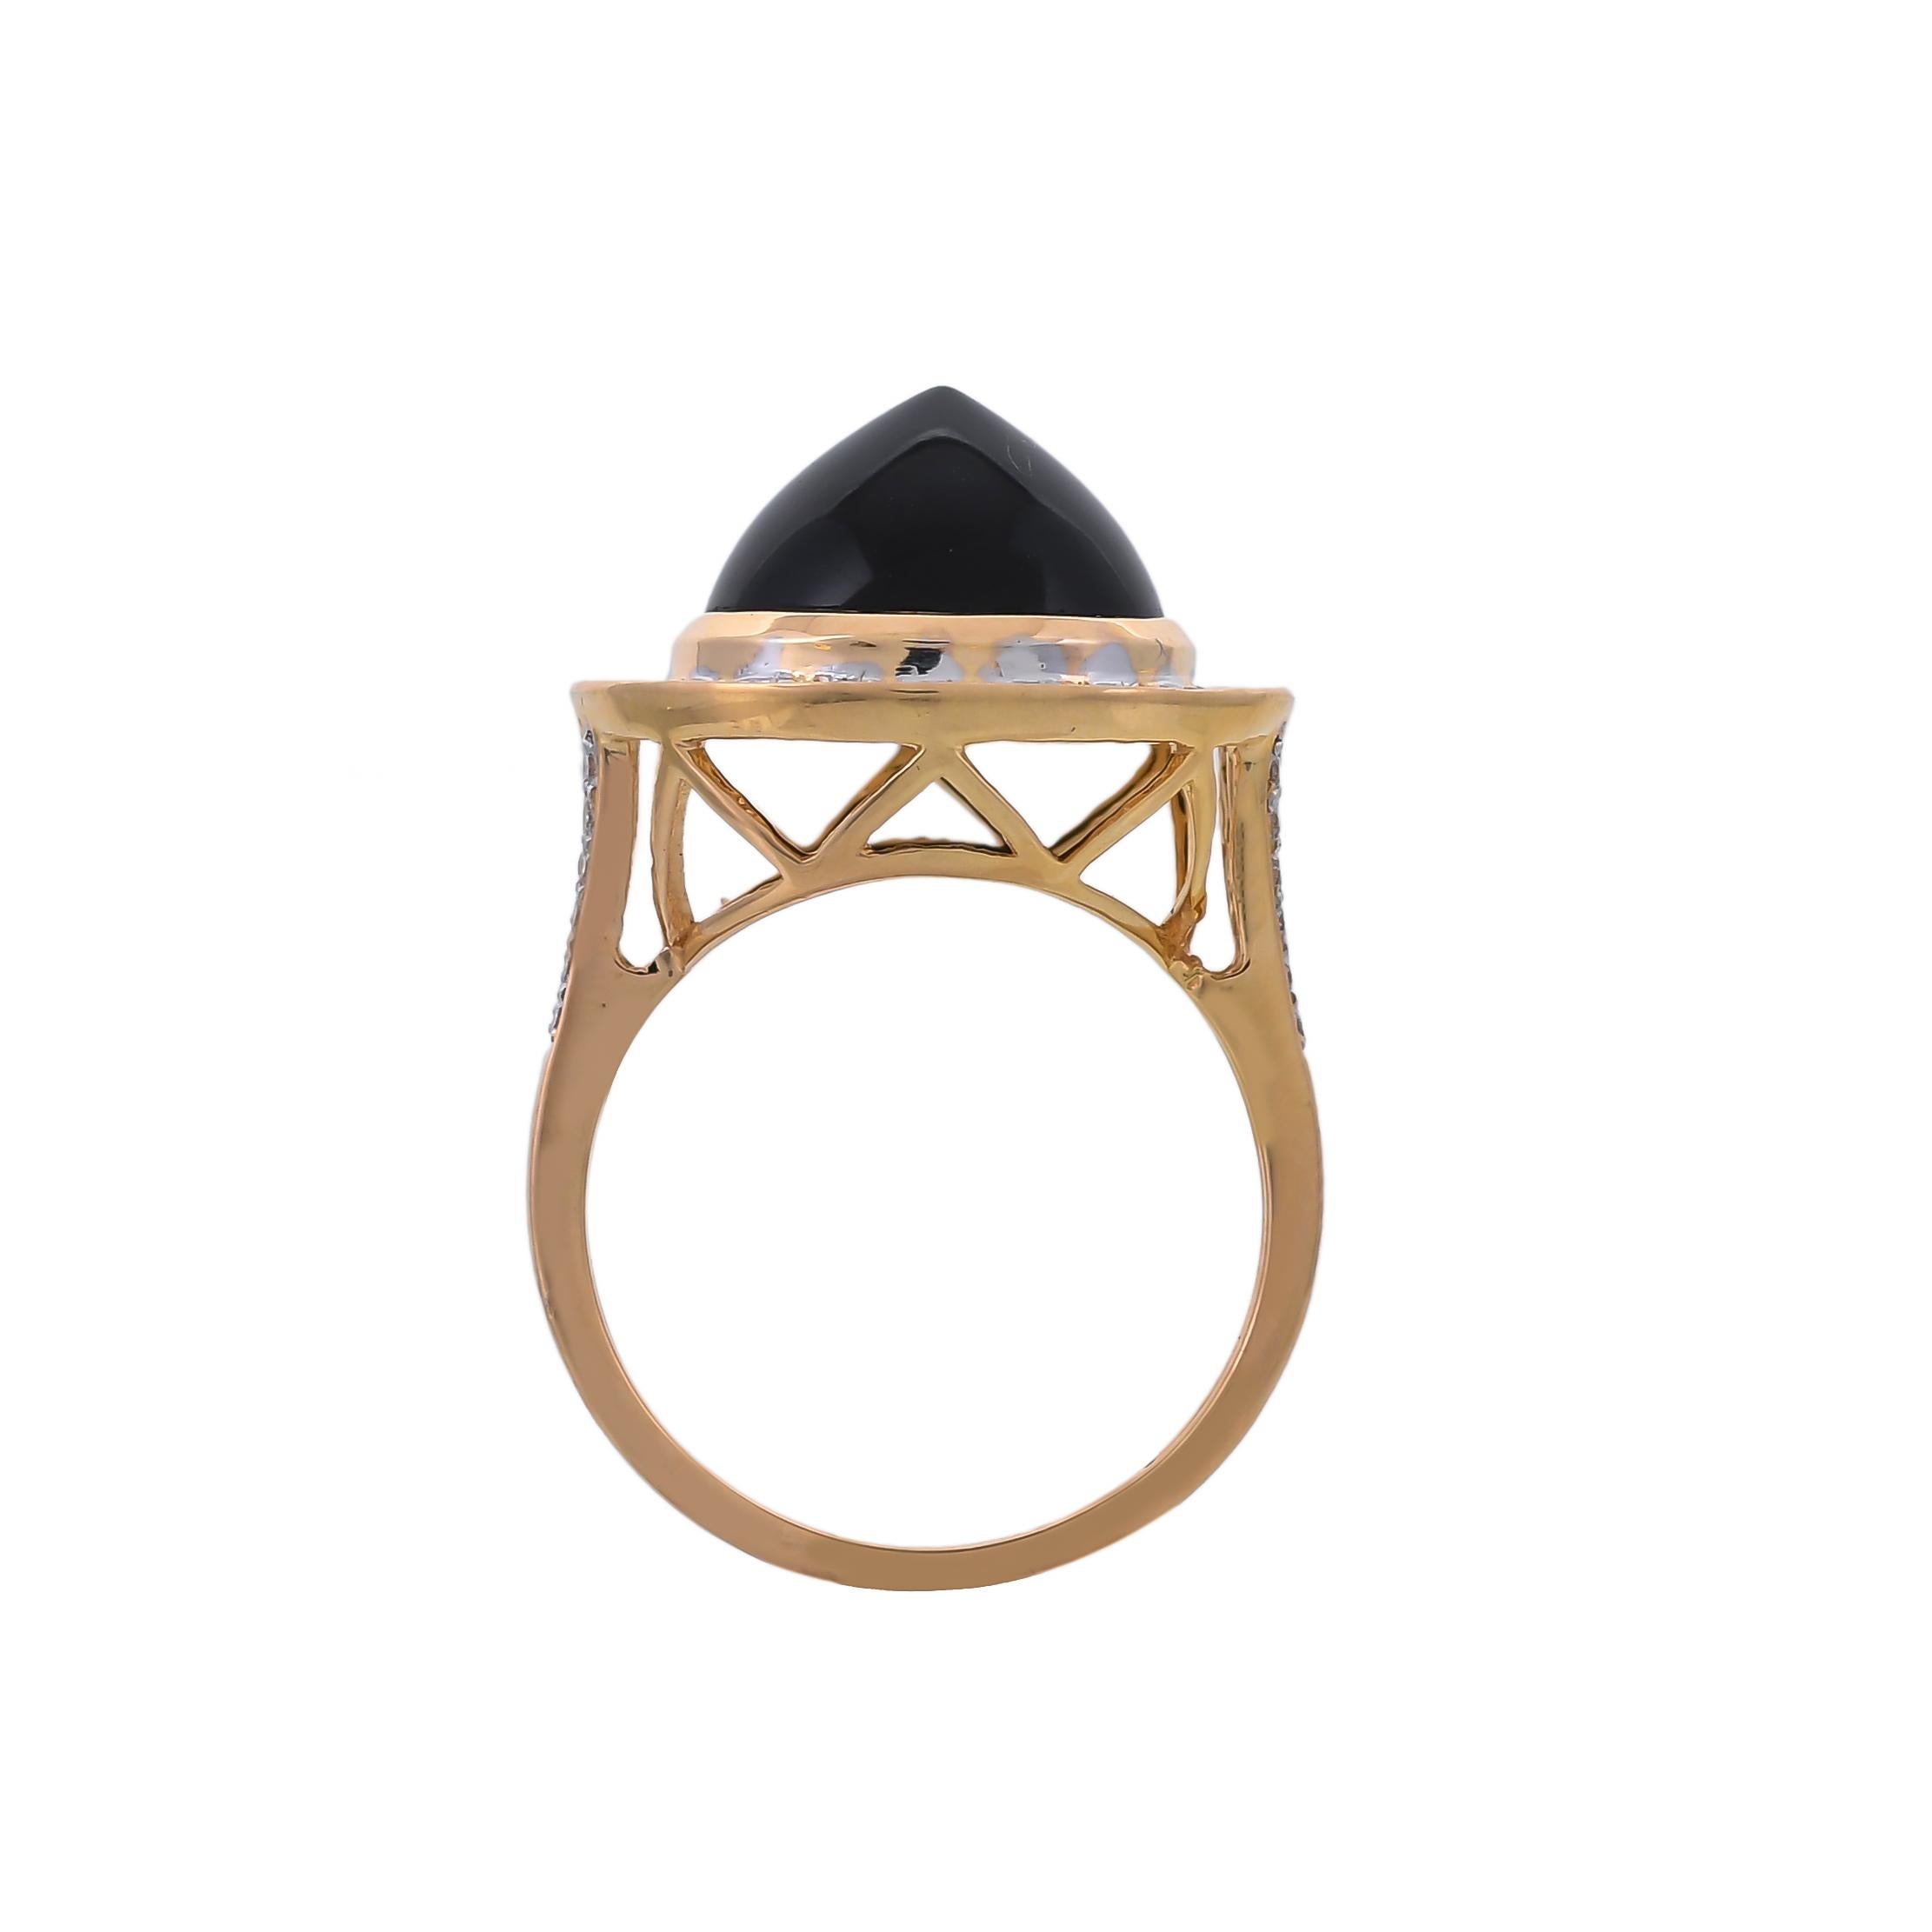 This 18 karats classic yellow gold ring from the collection Bon Bon is set meticulously with 0.31-carat diamonds and 6.36-carat black onyx.
Playful yet chic this ring is an answer to spice up your everyday style.
Ring size- US 7
Top measures-